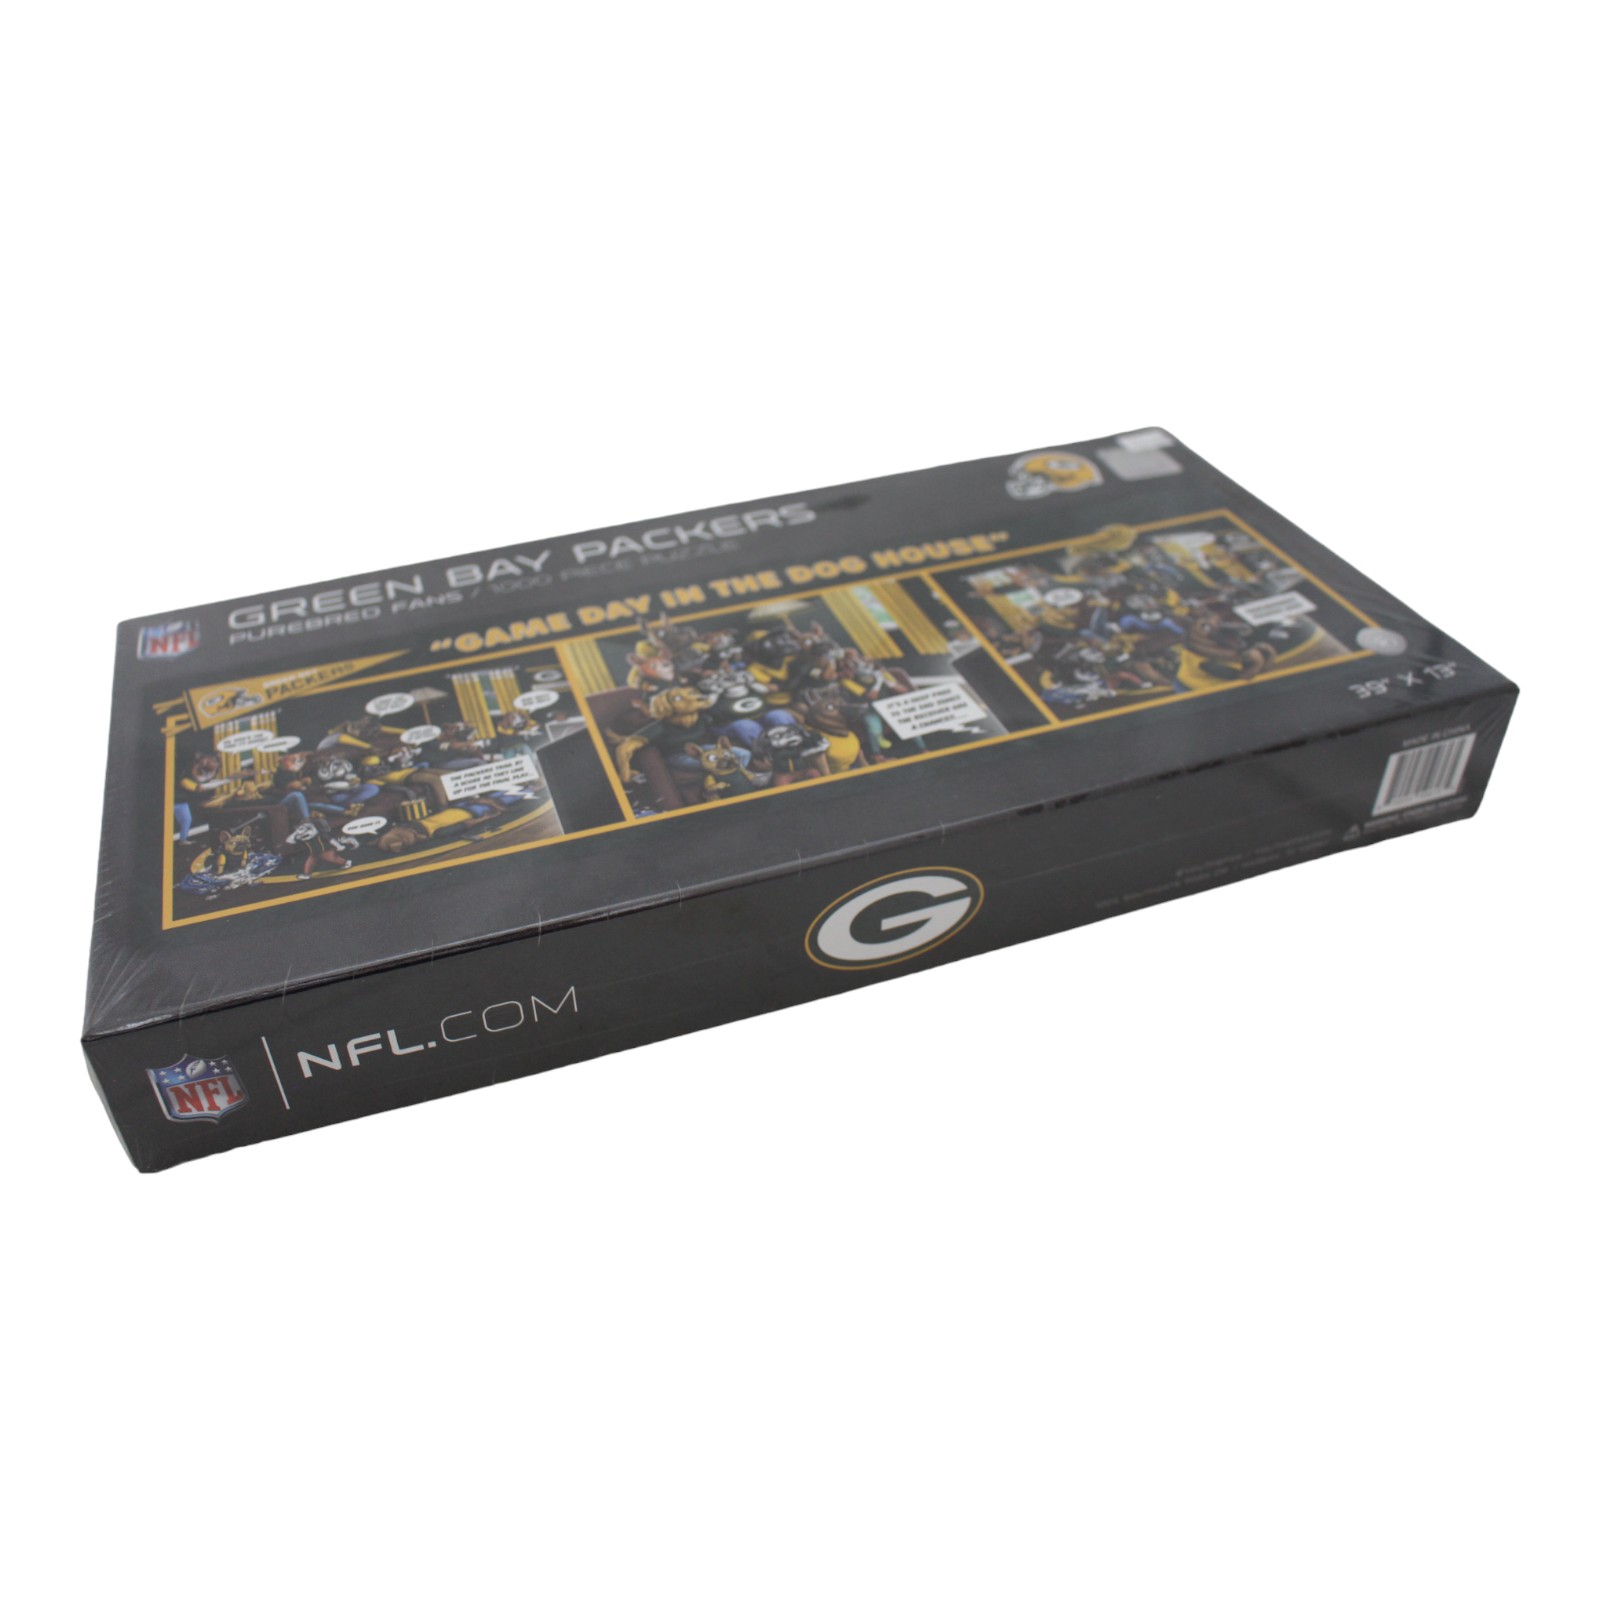 Green Bay Packers 39"x13" YouTheFan 1000 Piece Purebread Puzzle